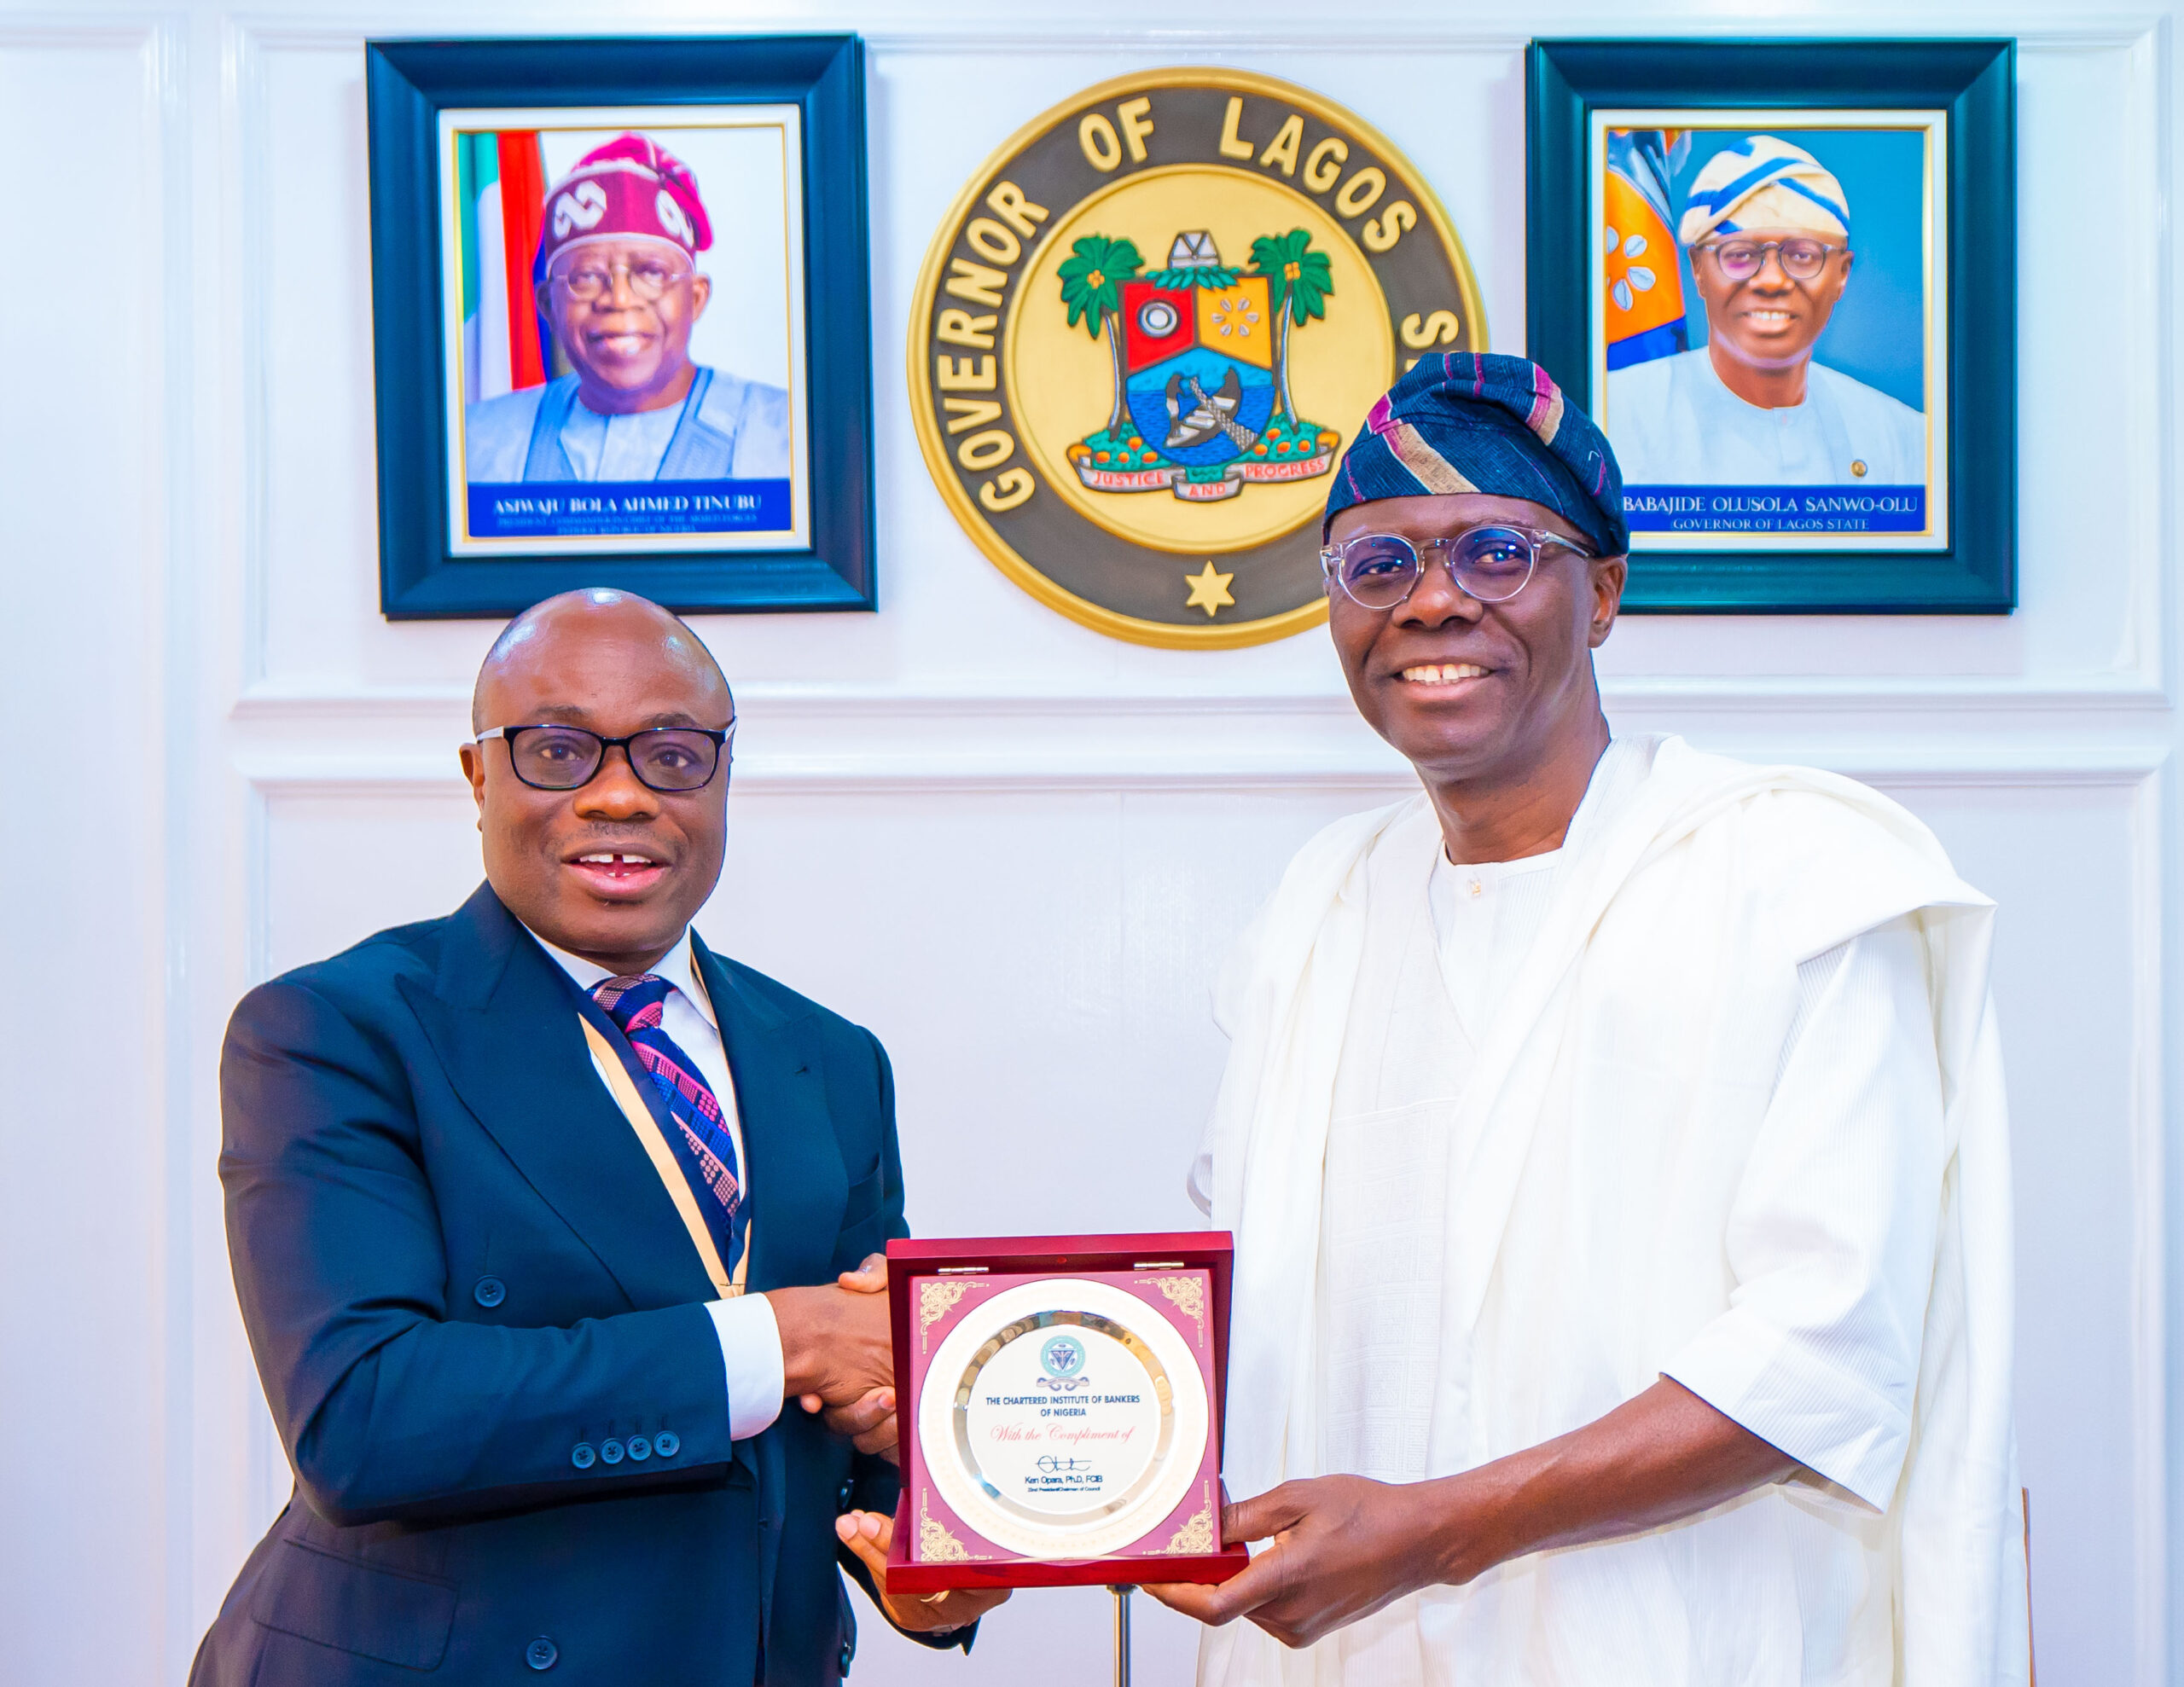 Photos: Gov Sanwo-Olu Receives Governing Council Of CIBN Led By Its President/Chairman Of Council, Dr Kenneth Opara At Lagos House